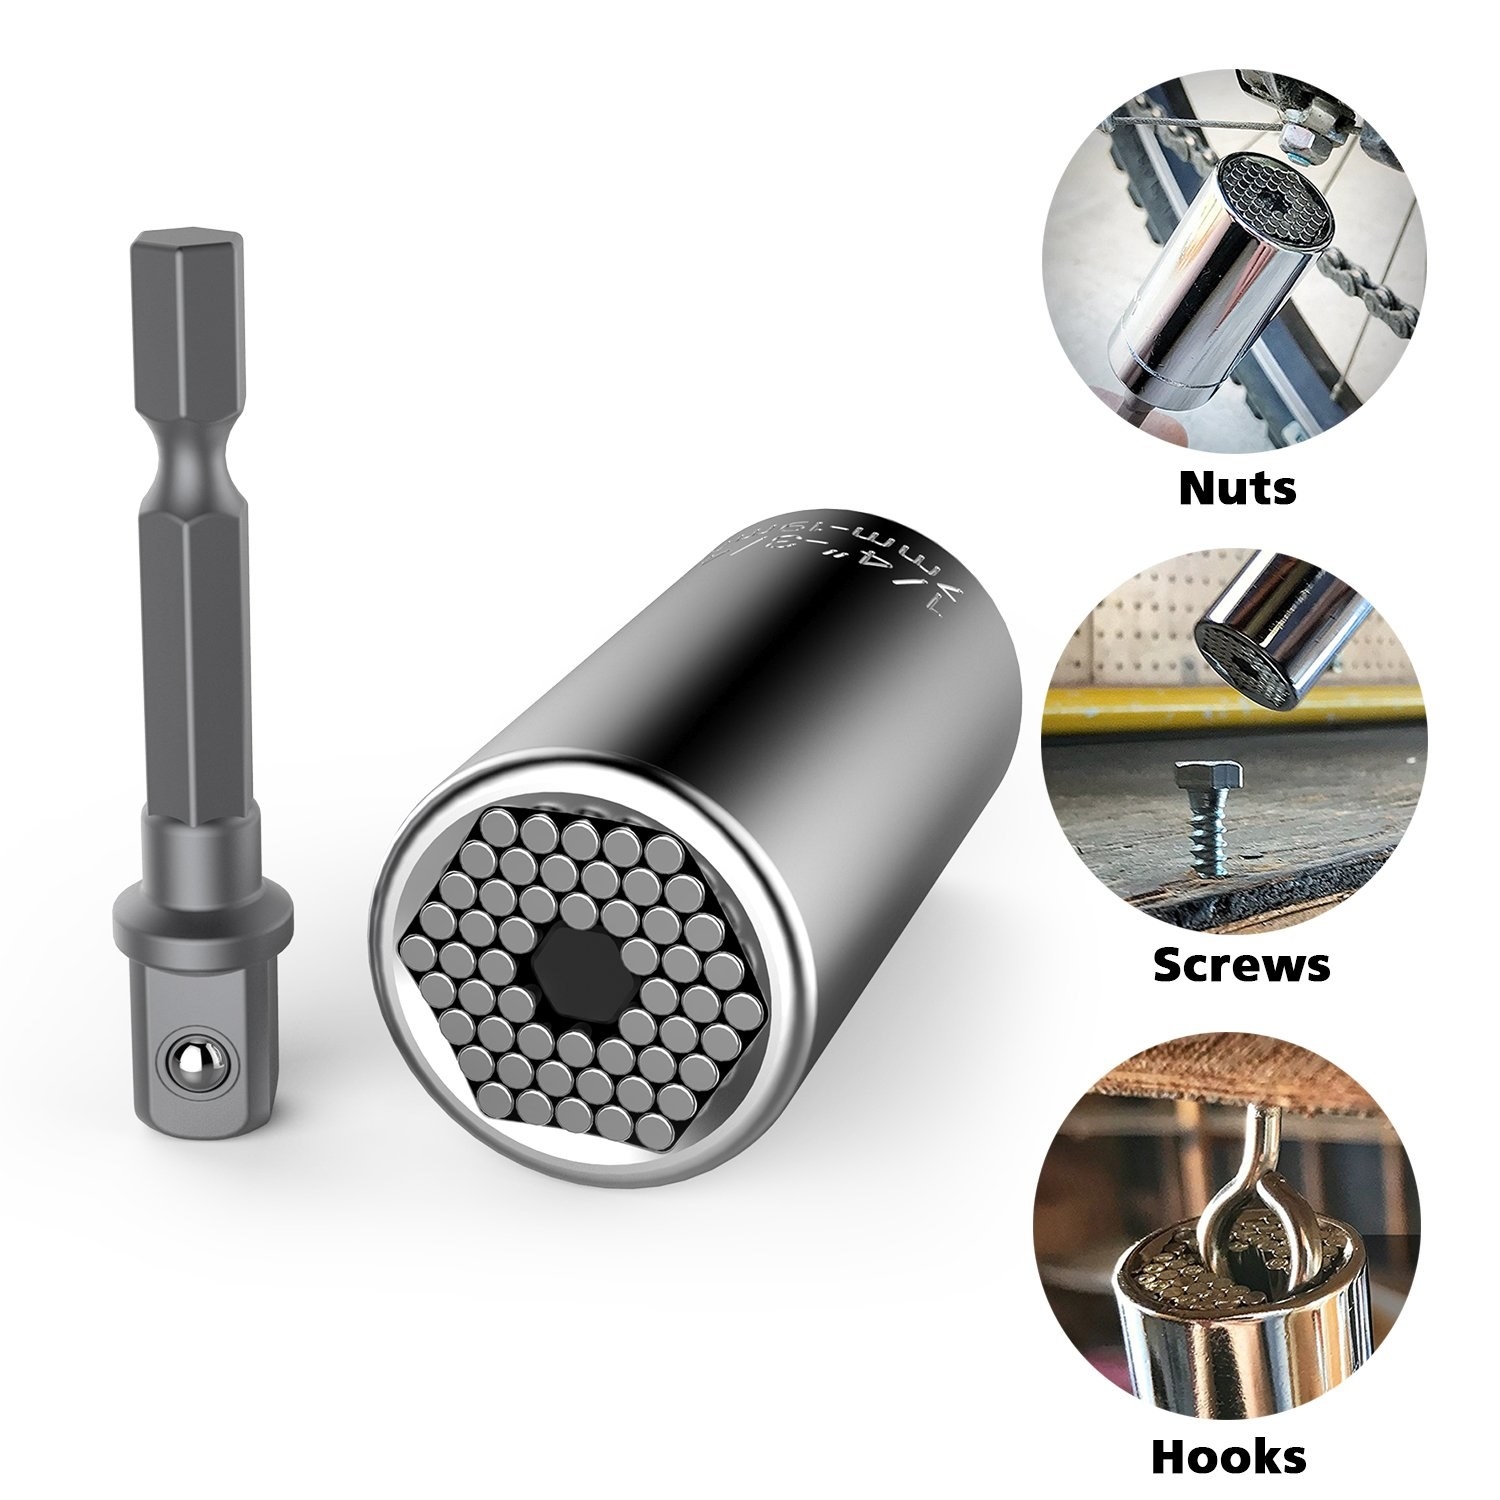 closeup of socket and three images showing it being used on nuts, screws, and hooks